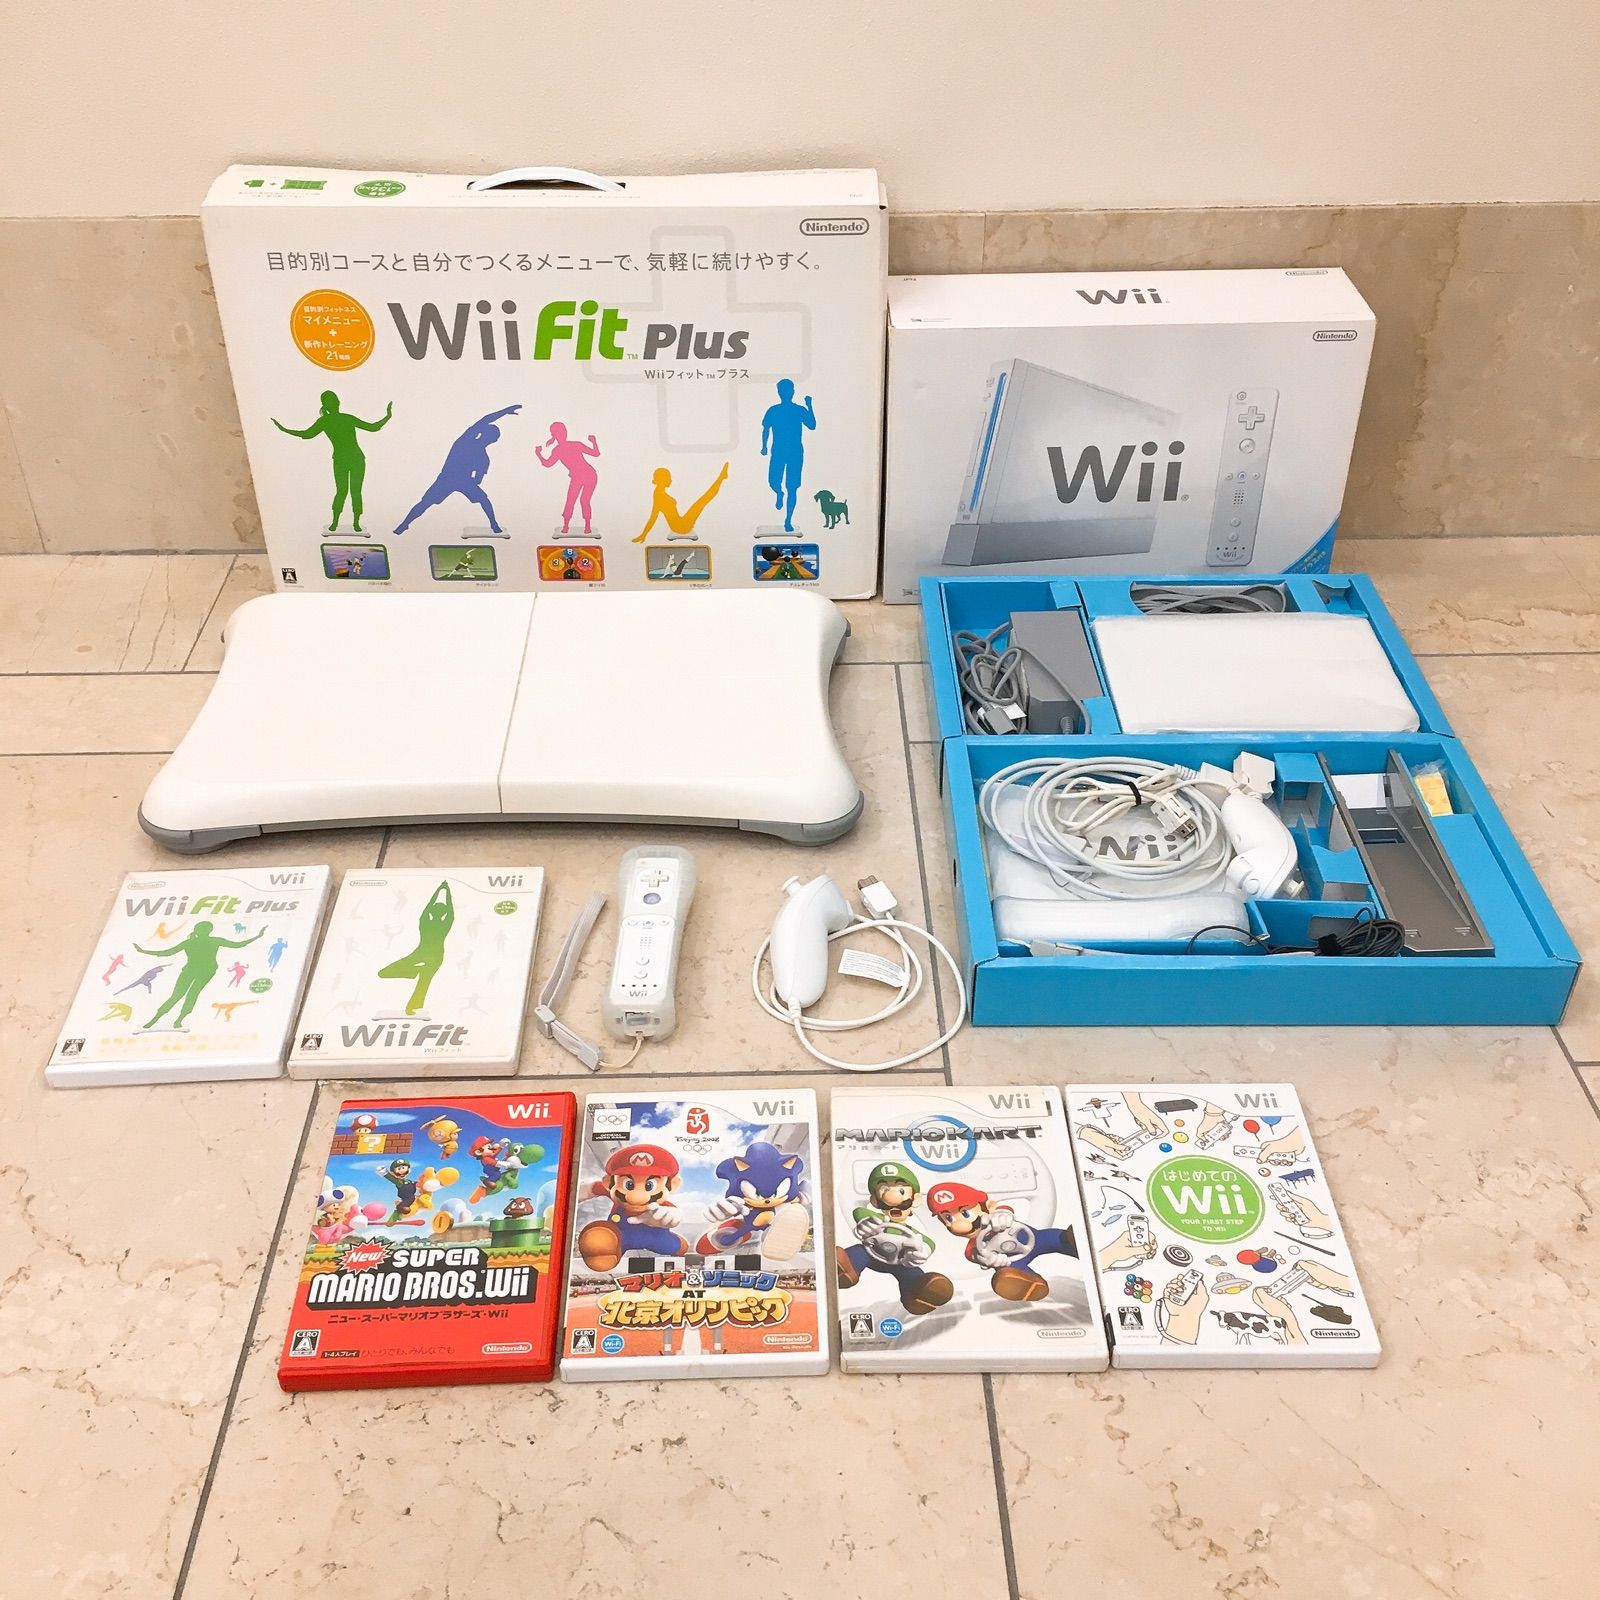 Wii本体 Wiiバランスボード ソフト コントローラー まとめ売り 動作